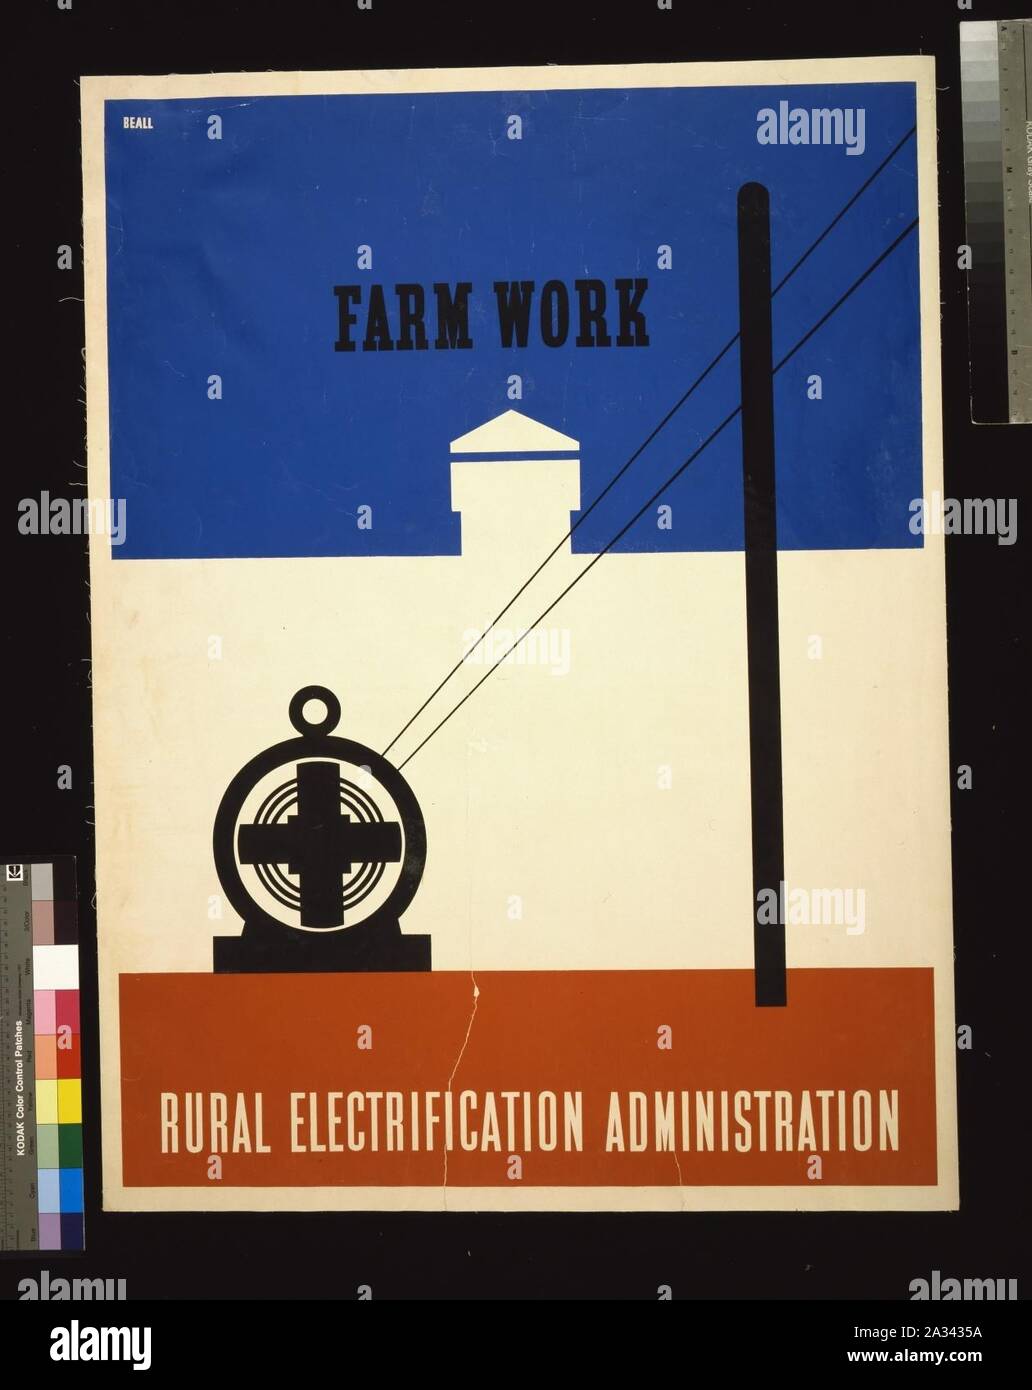 Farm work Rural Electrification Administration, U.S. Department of Agriculture - - Beall. Stock Photo